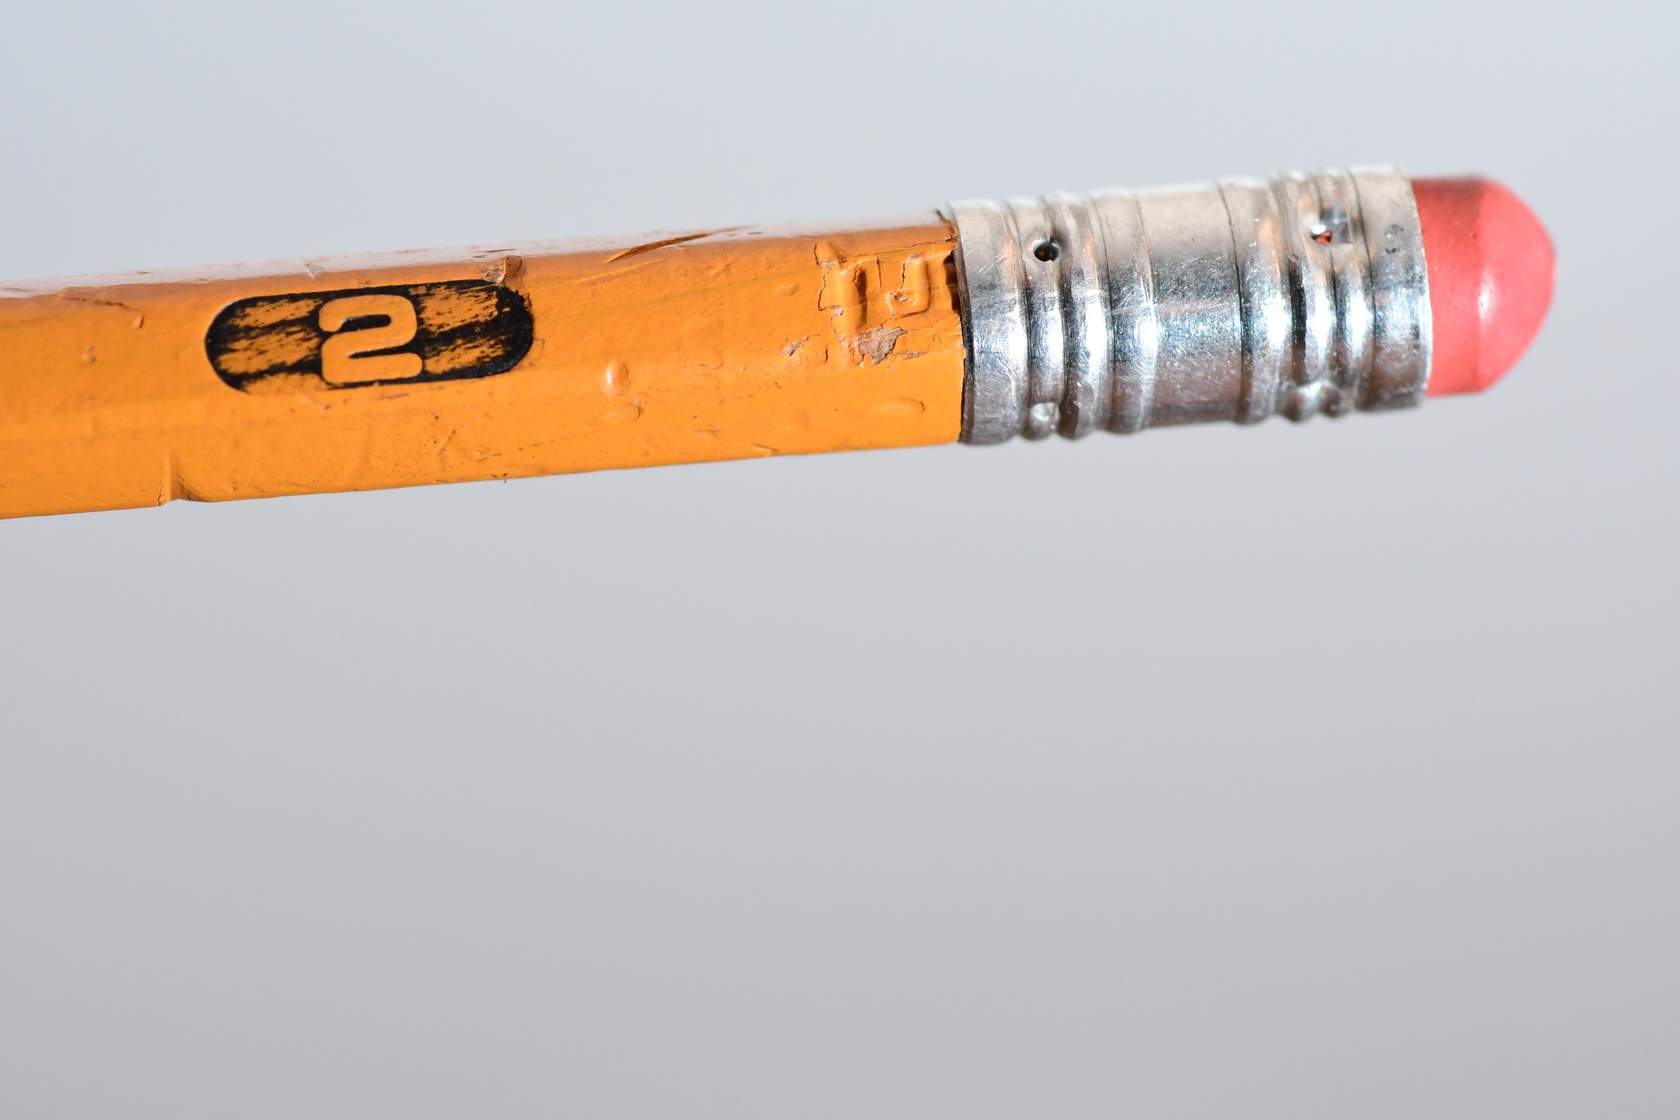 A close up of a yellow pencil.